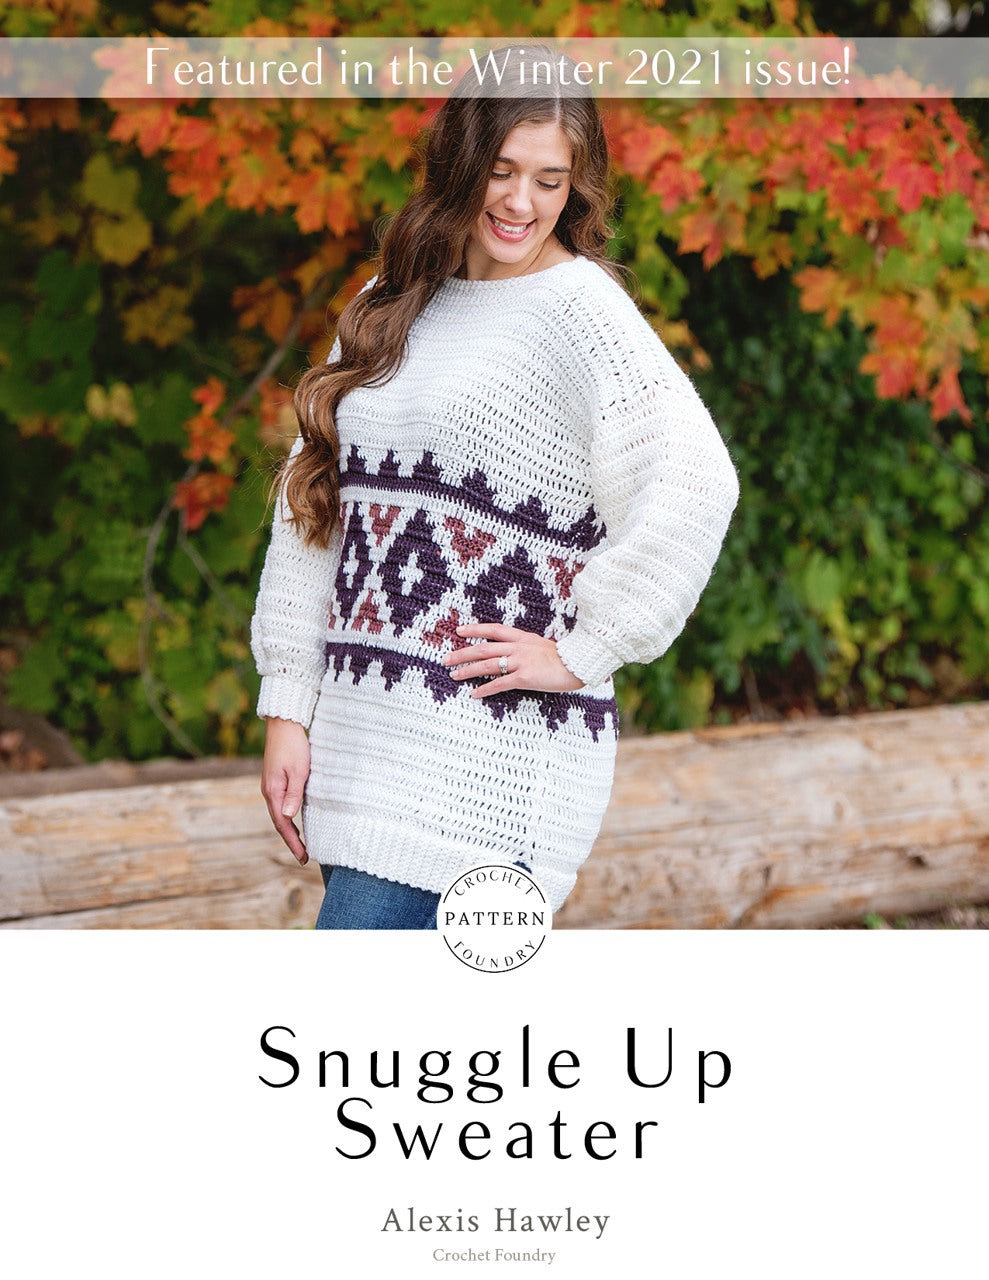 Snuggle Up Sweater Crochet PDF Pattern by Alexis Hawley